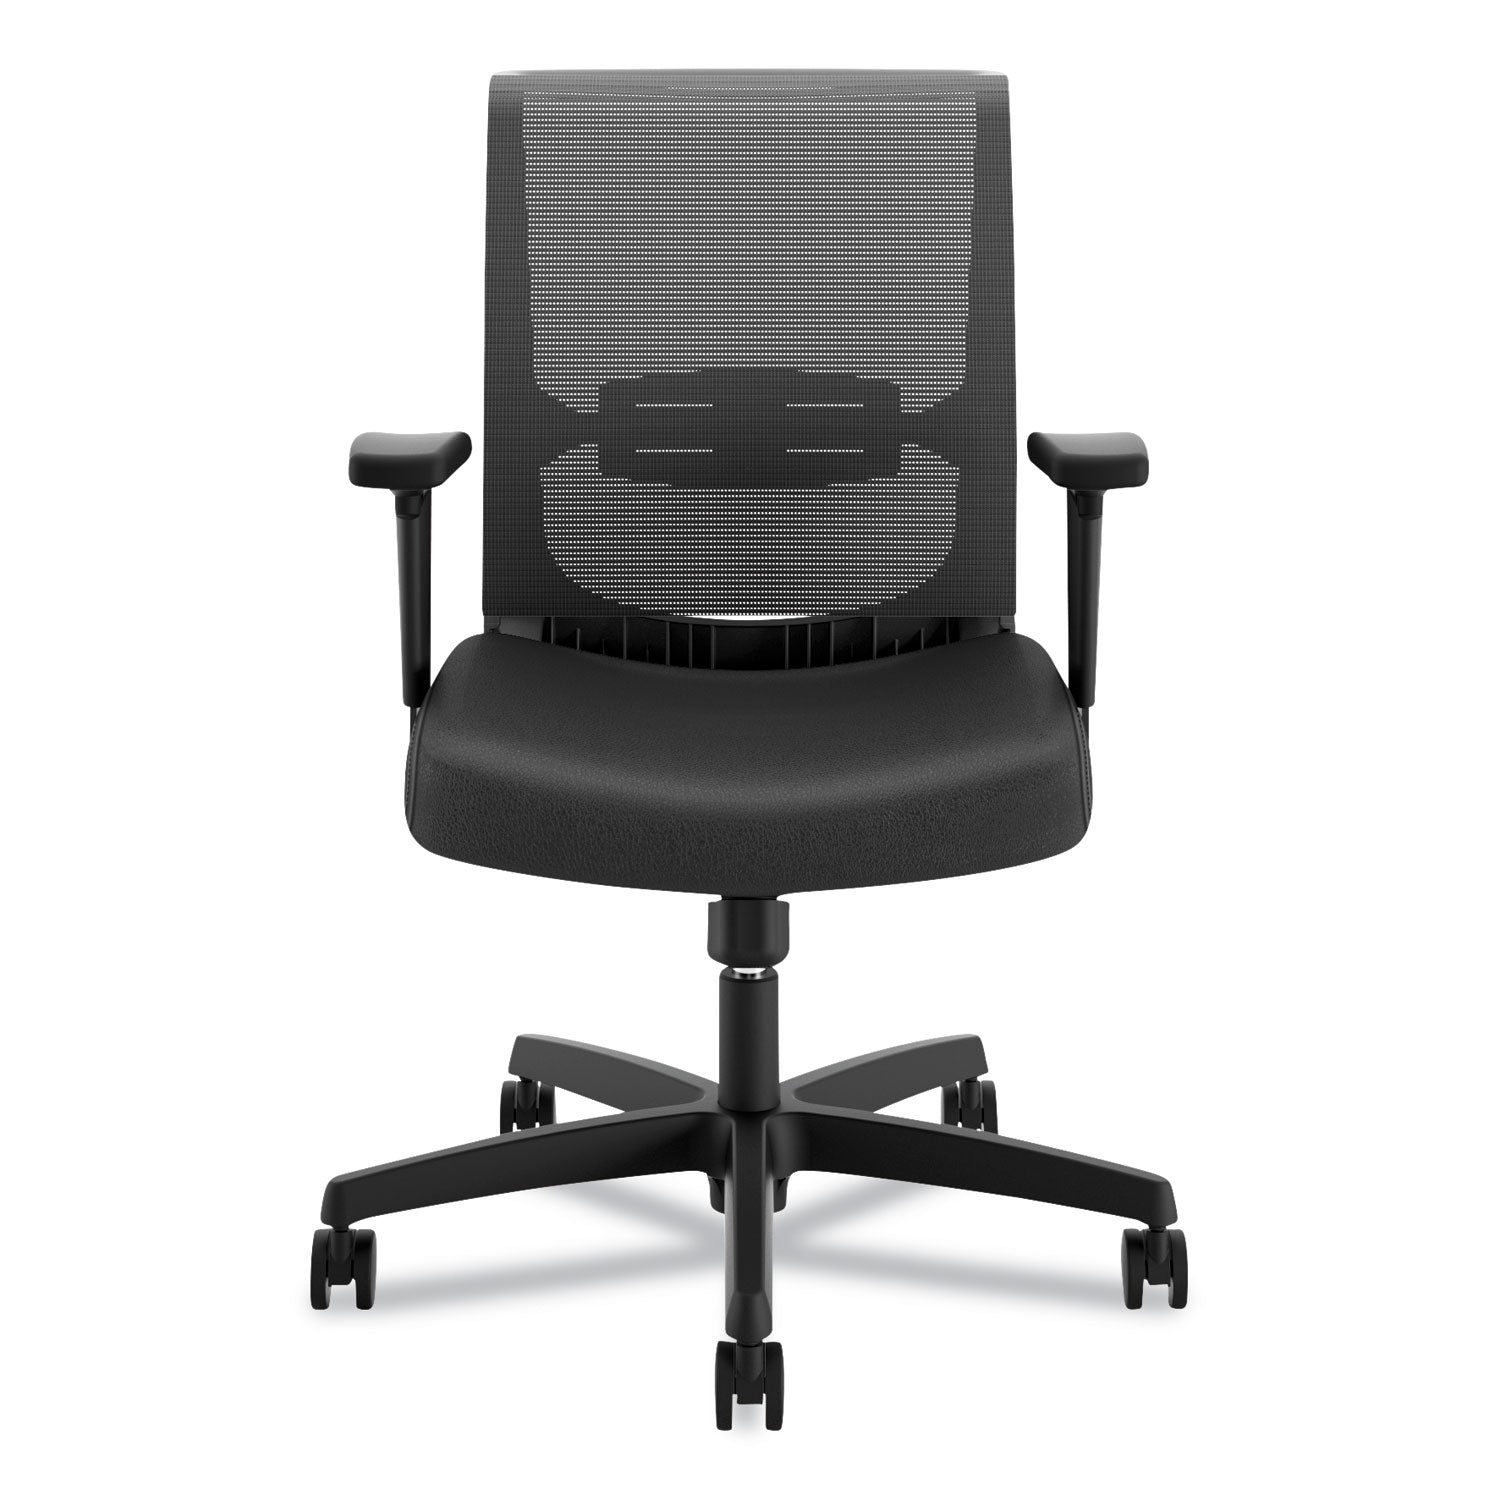 convergence-mid-back-task-chair-swivel-tilt-supports-up-to-275-lb-1575-to-2013-seat-height-black_honcms1aur10 - 2